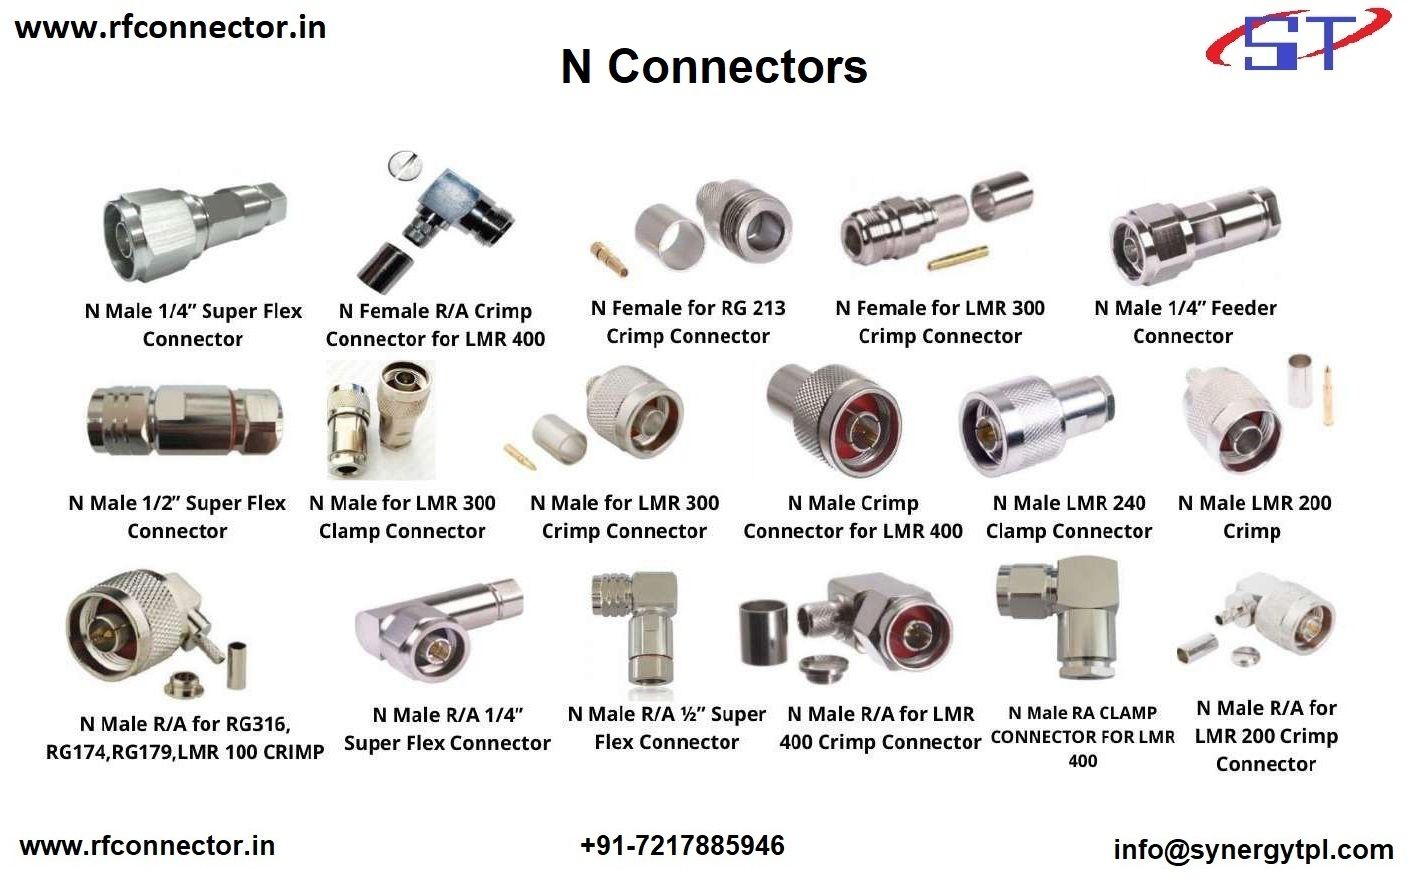 n male clamp connector for LMR 400 cable